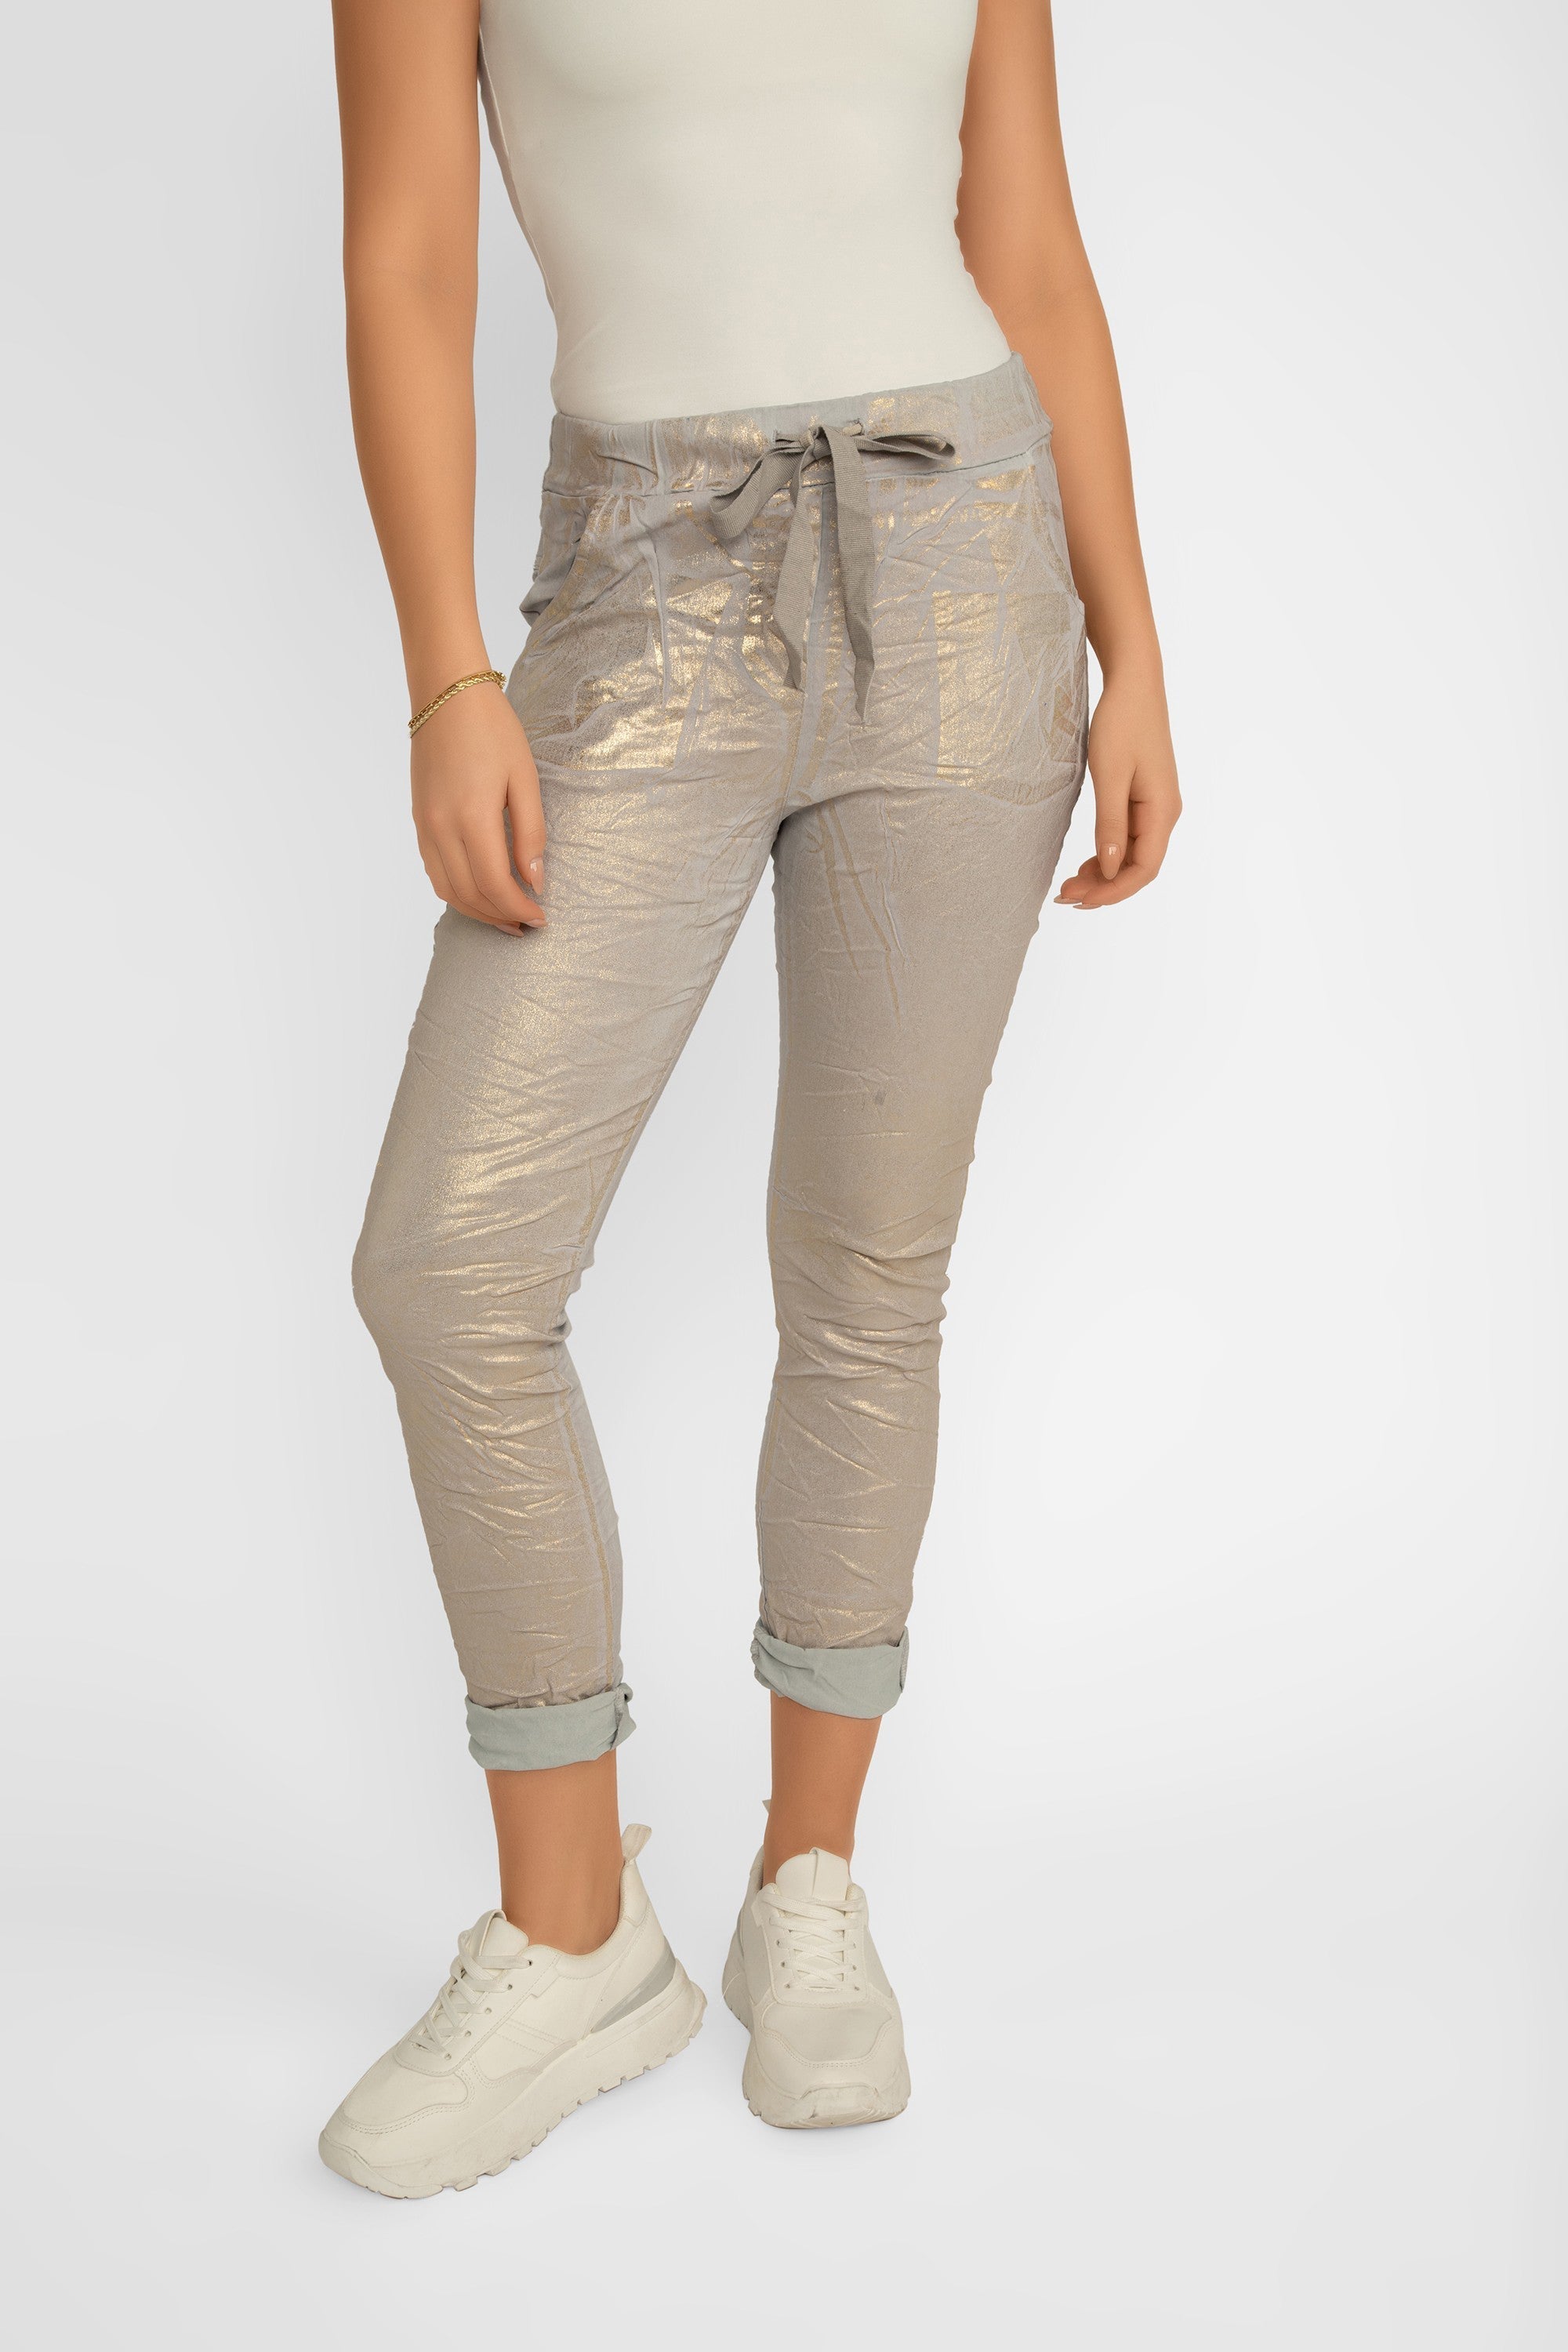 Front view of Bell Amore (21258) Women's Cropped Slim Fit, Metallic Coated Pull On Pants with Pockets in Light Grey with Gold foil